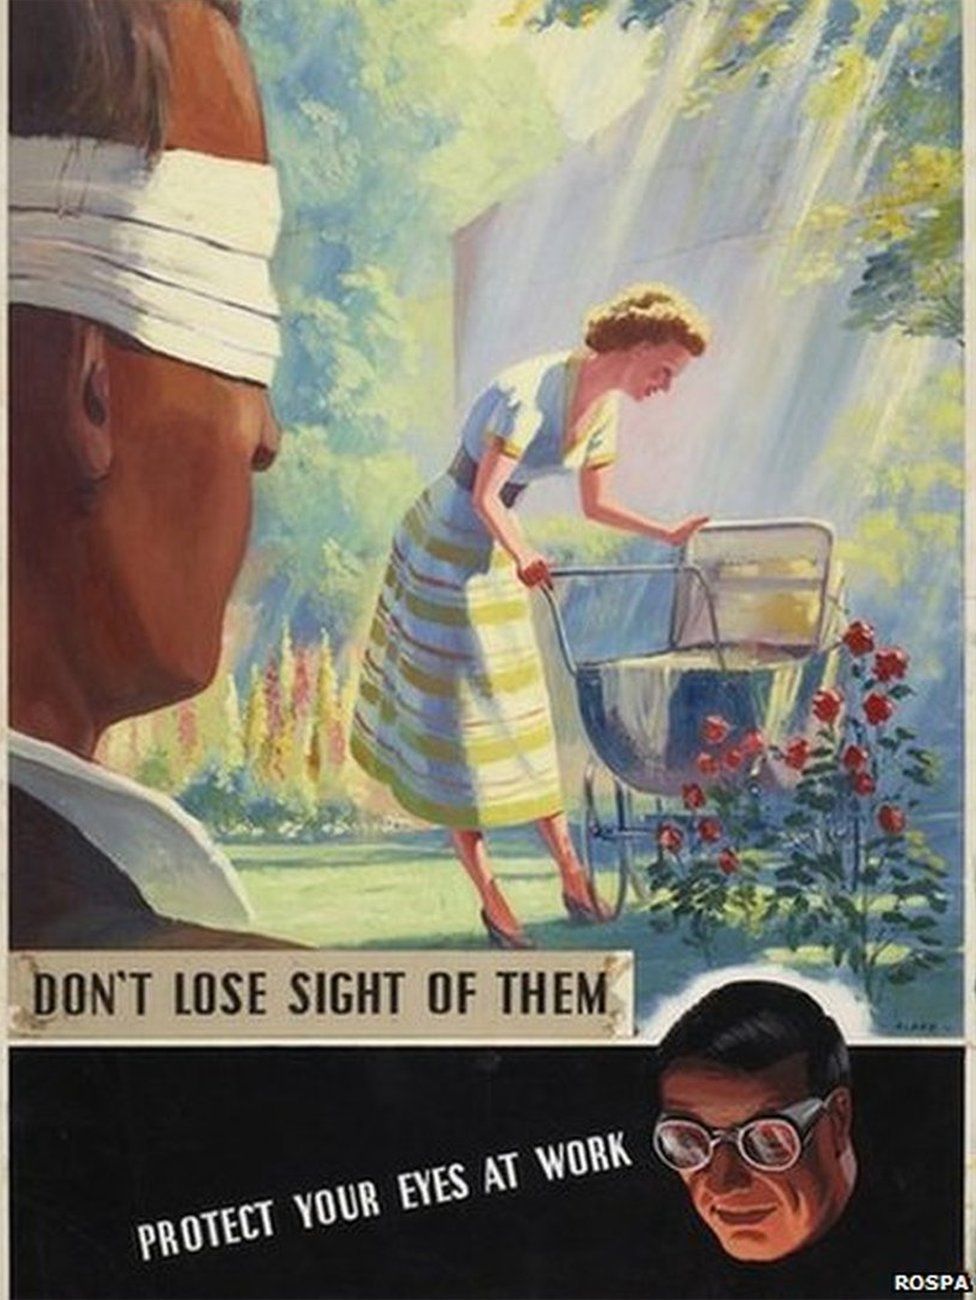 Don’t Lose Sight of Them, Protect Your Eyes at Work, hand-rendered artwork, industrial safety, F Blake, 1954 (RoSPA)